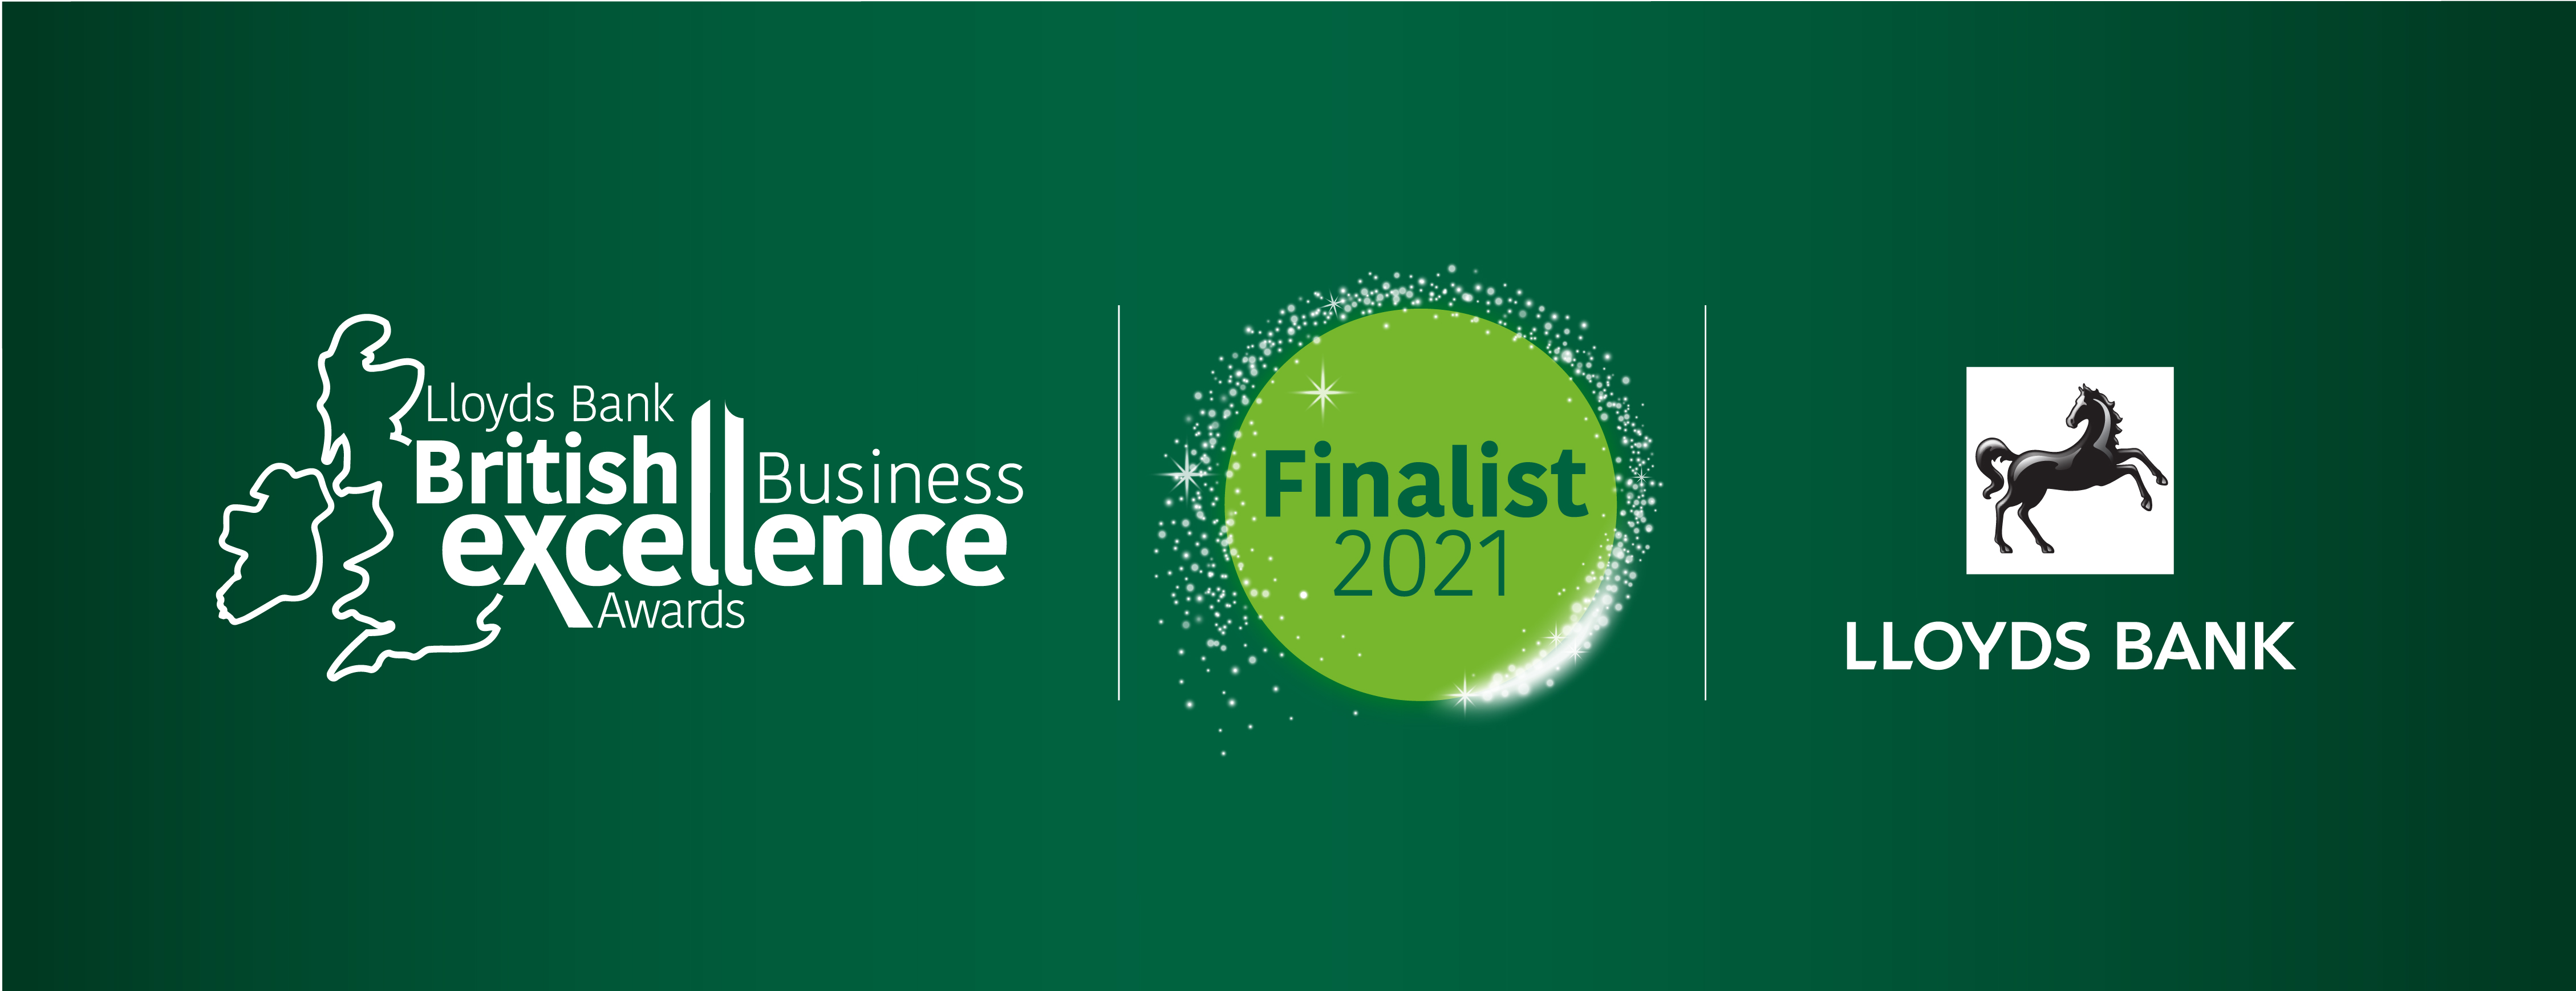 Lloyds business award: Our work with the NHS Trust